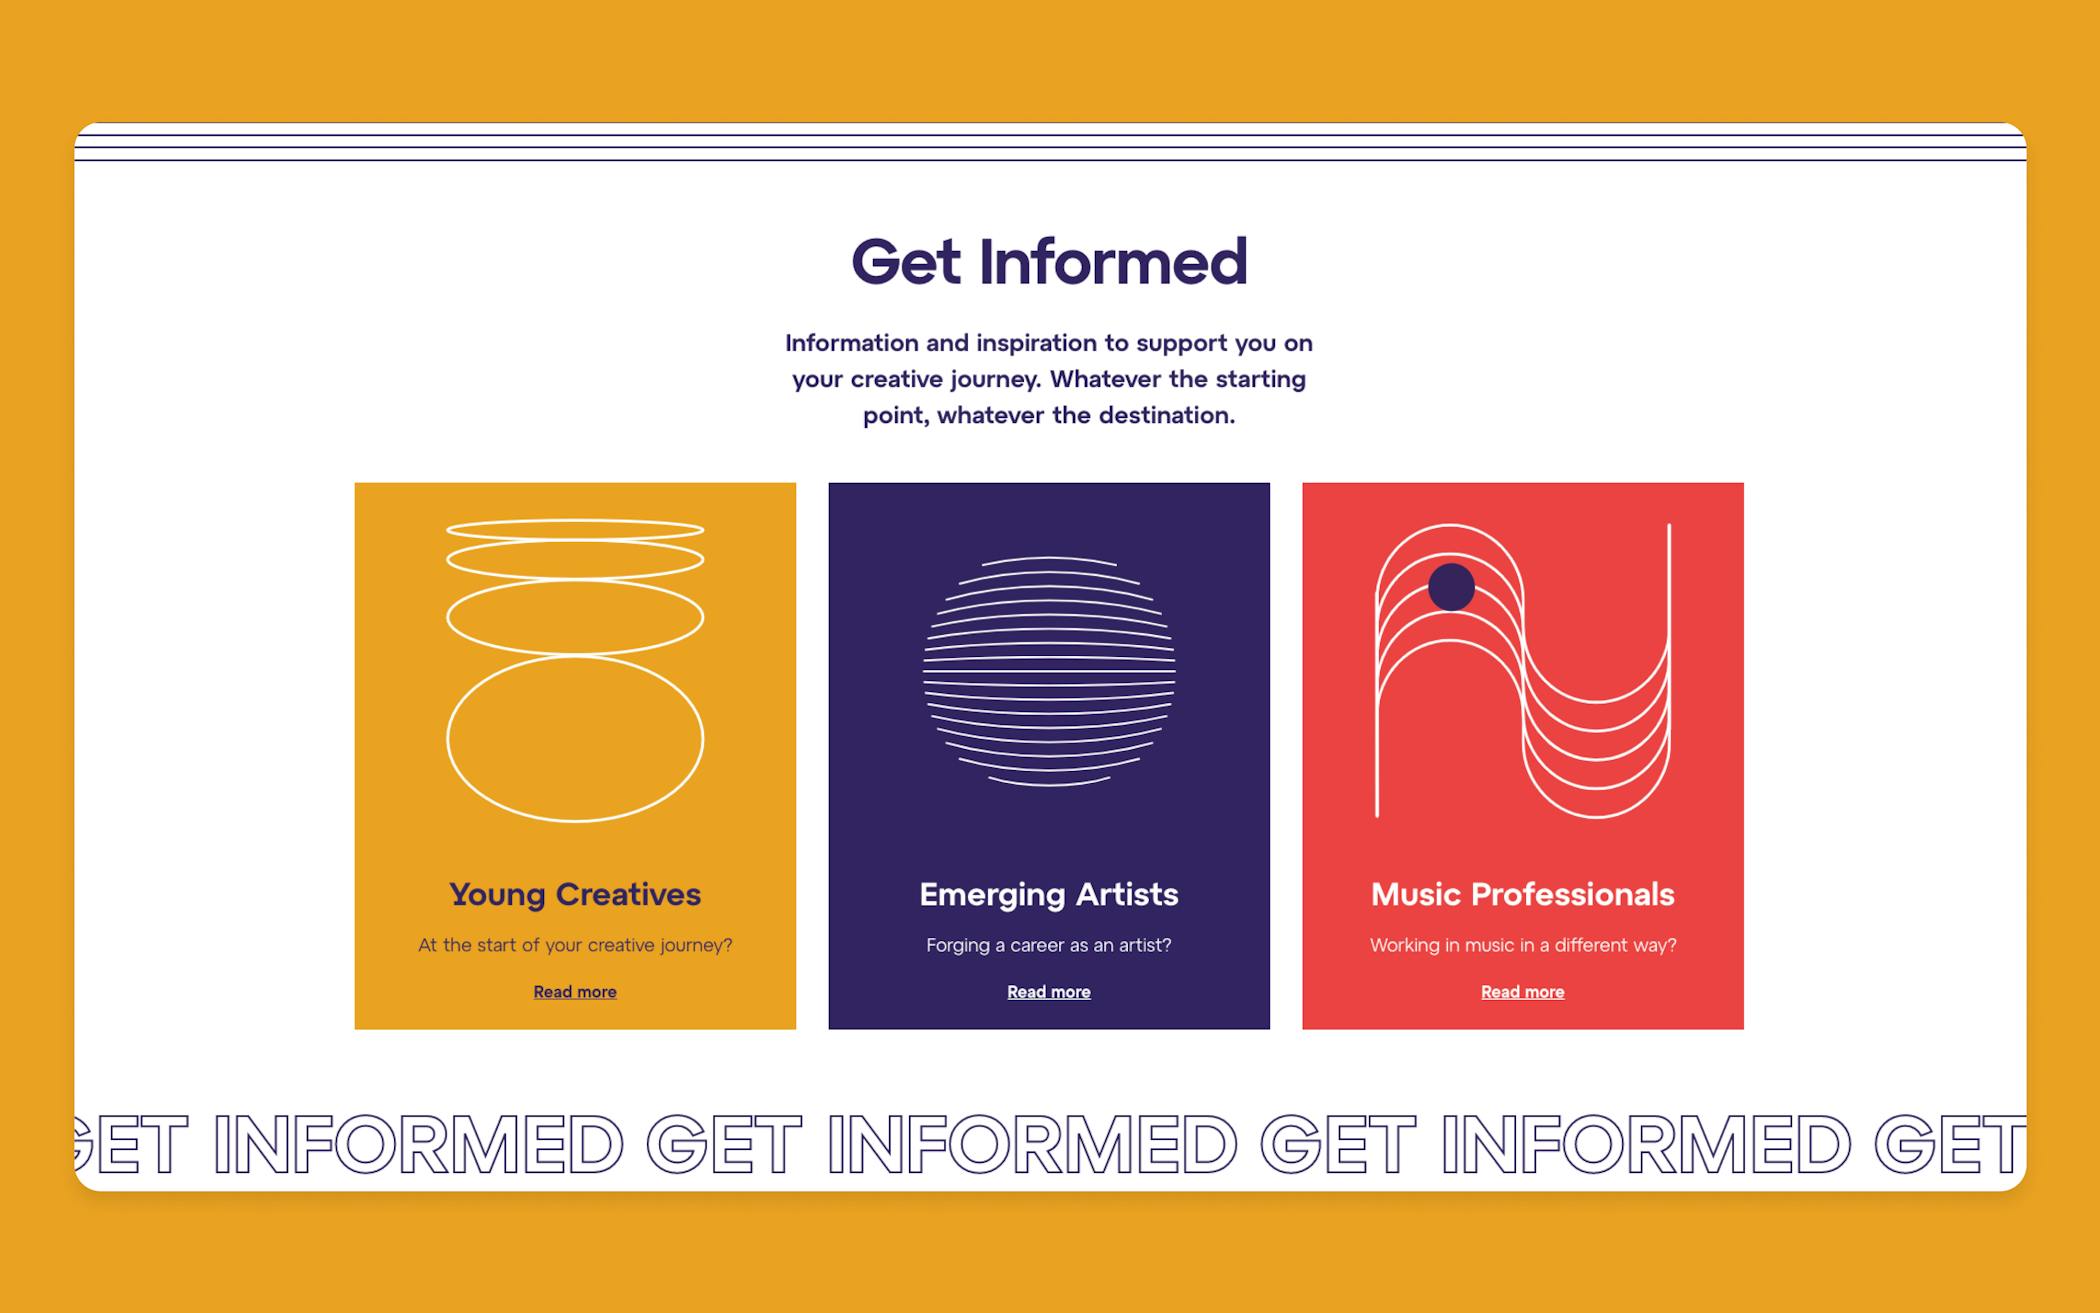 The "Get Informed" section of the website, with areas for Young Creatives, Emerging Artists and Music Professionals.